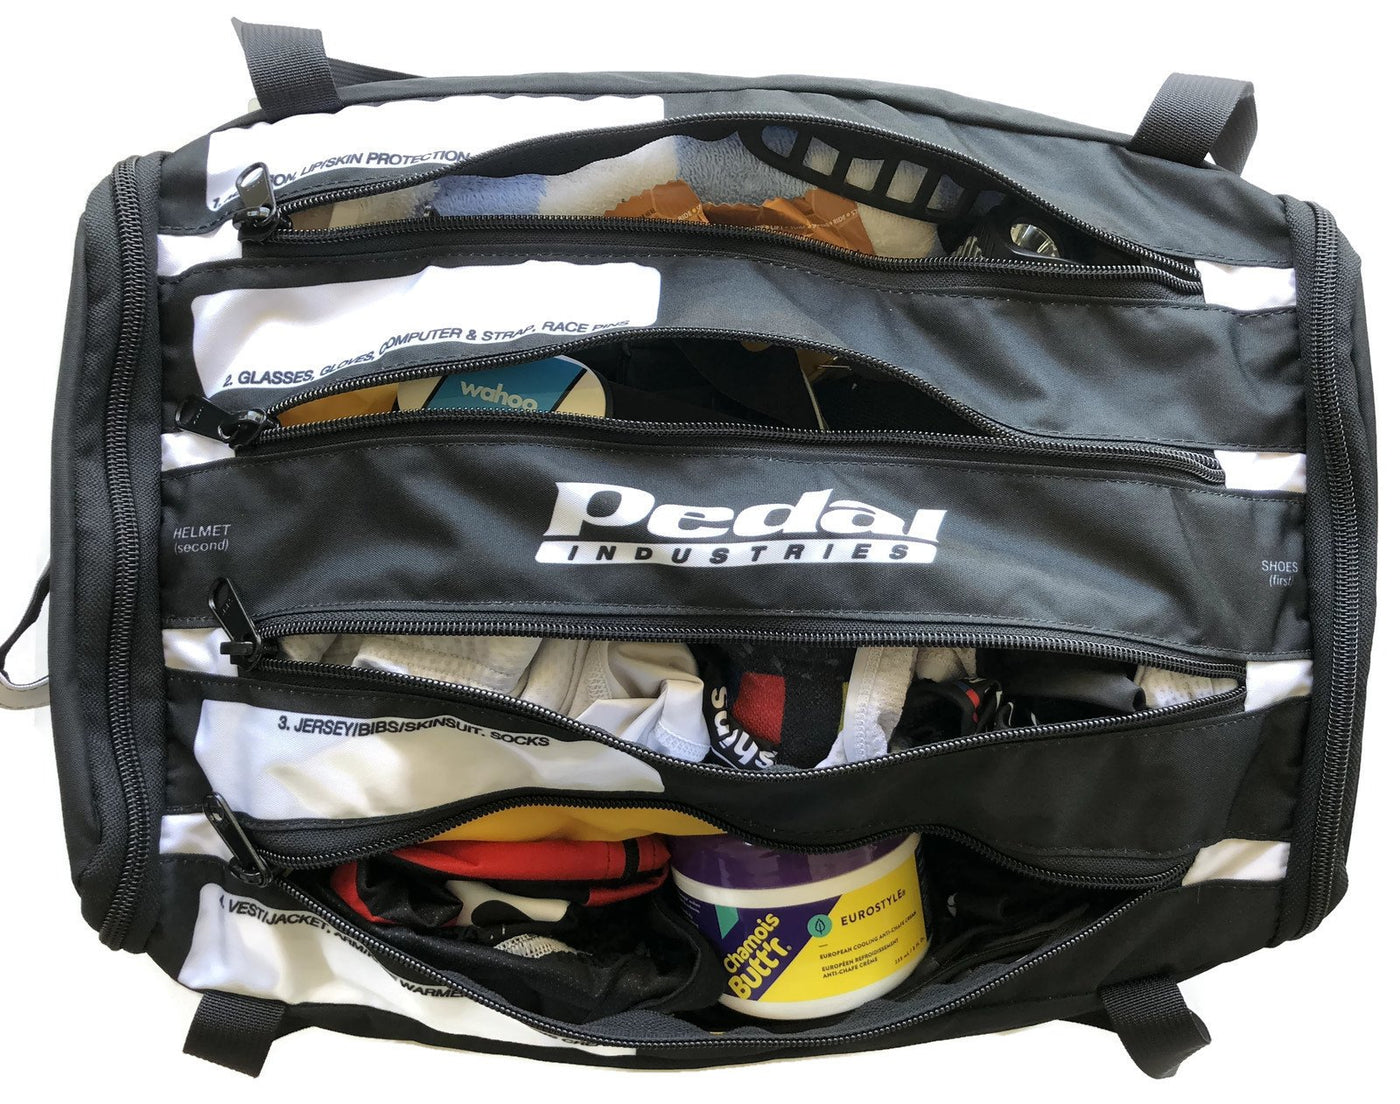 Cannondale Masters RACEDAY BAG